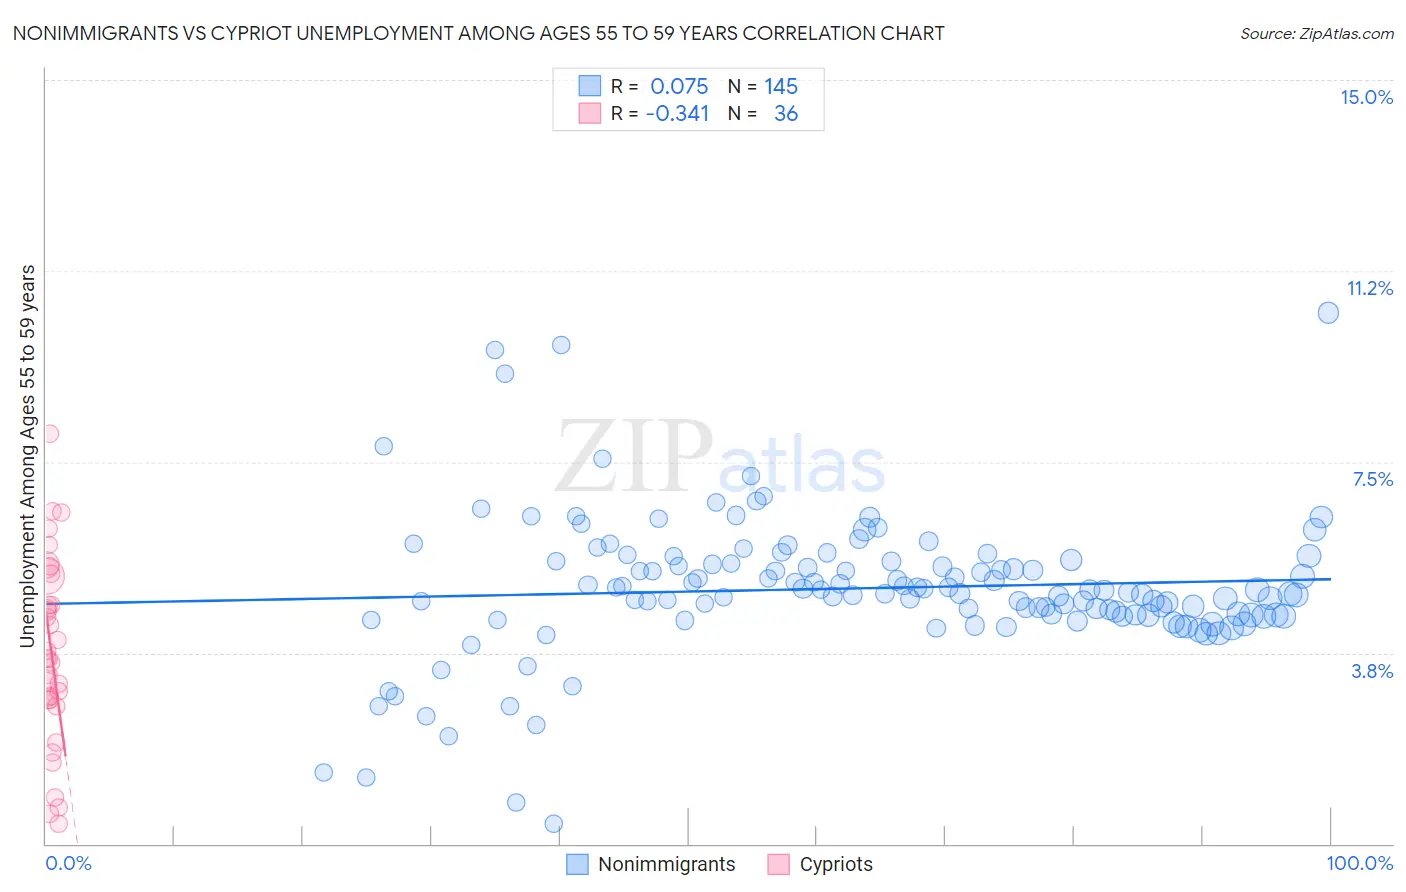 Nonimmigrants vs Cypriot Unemployment Among Ages 55 to 59 years